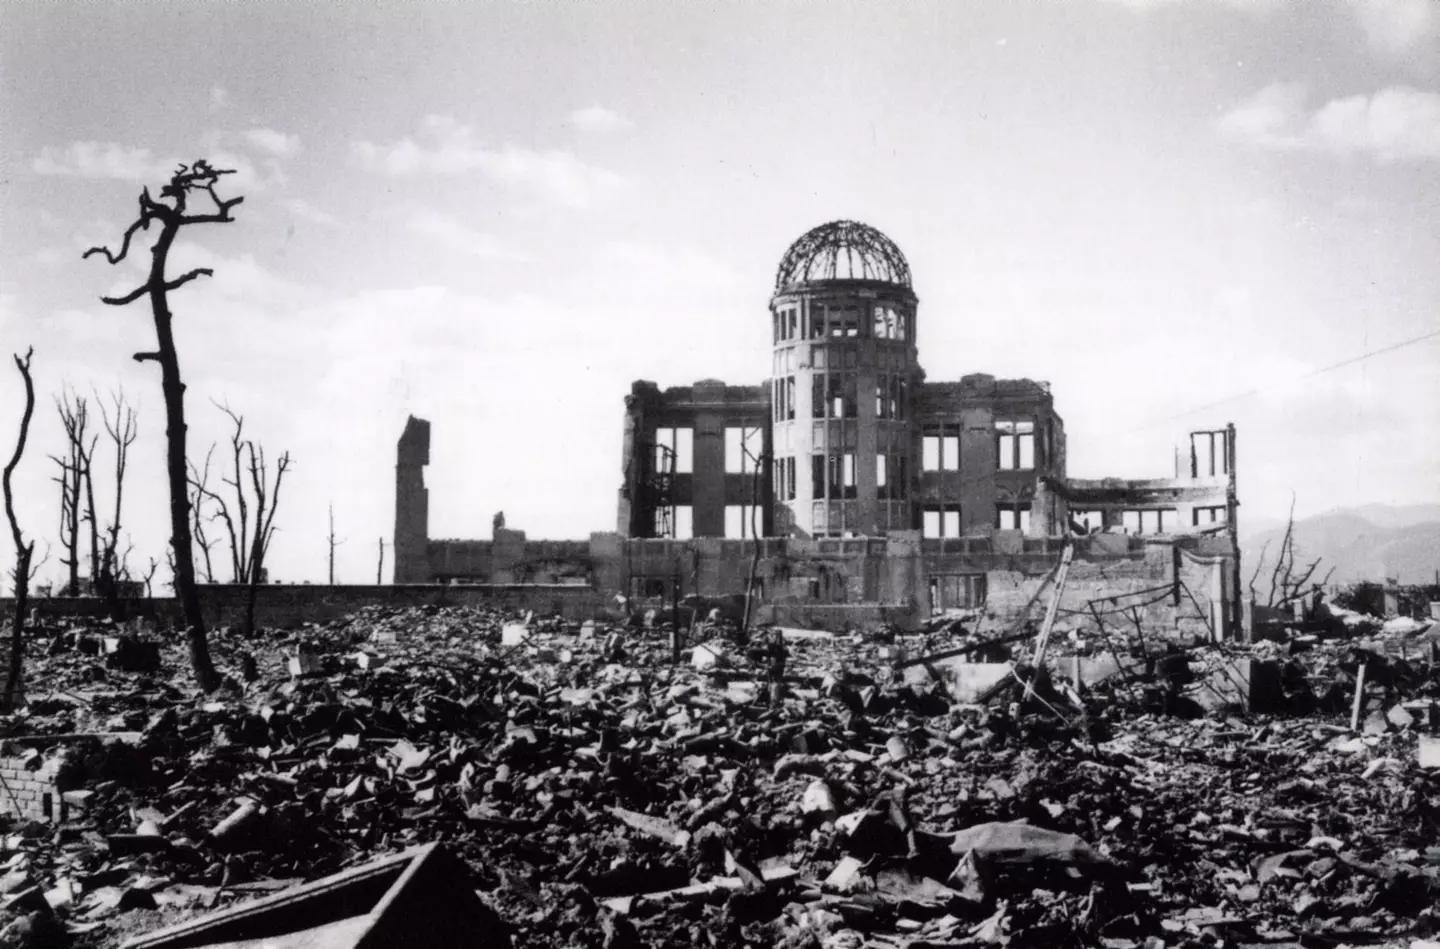 The Genbaku Dome was the only structure left standing in the blast radius as it was directly beneath the bomb.